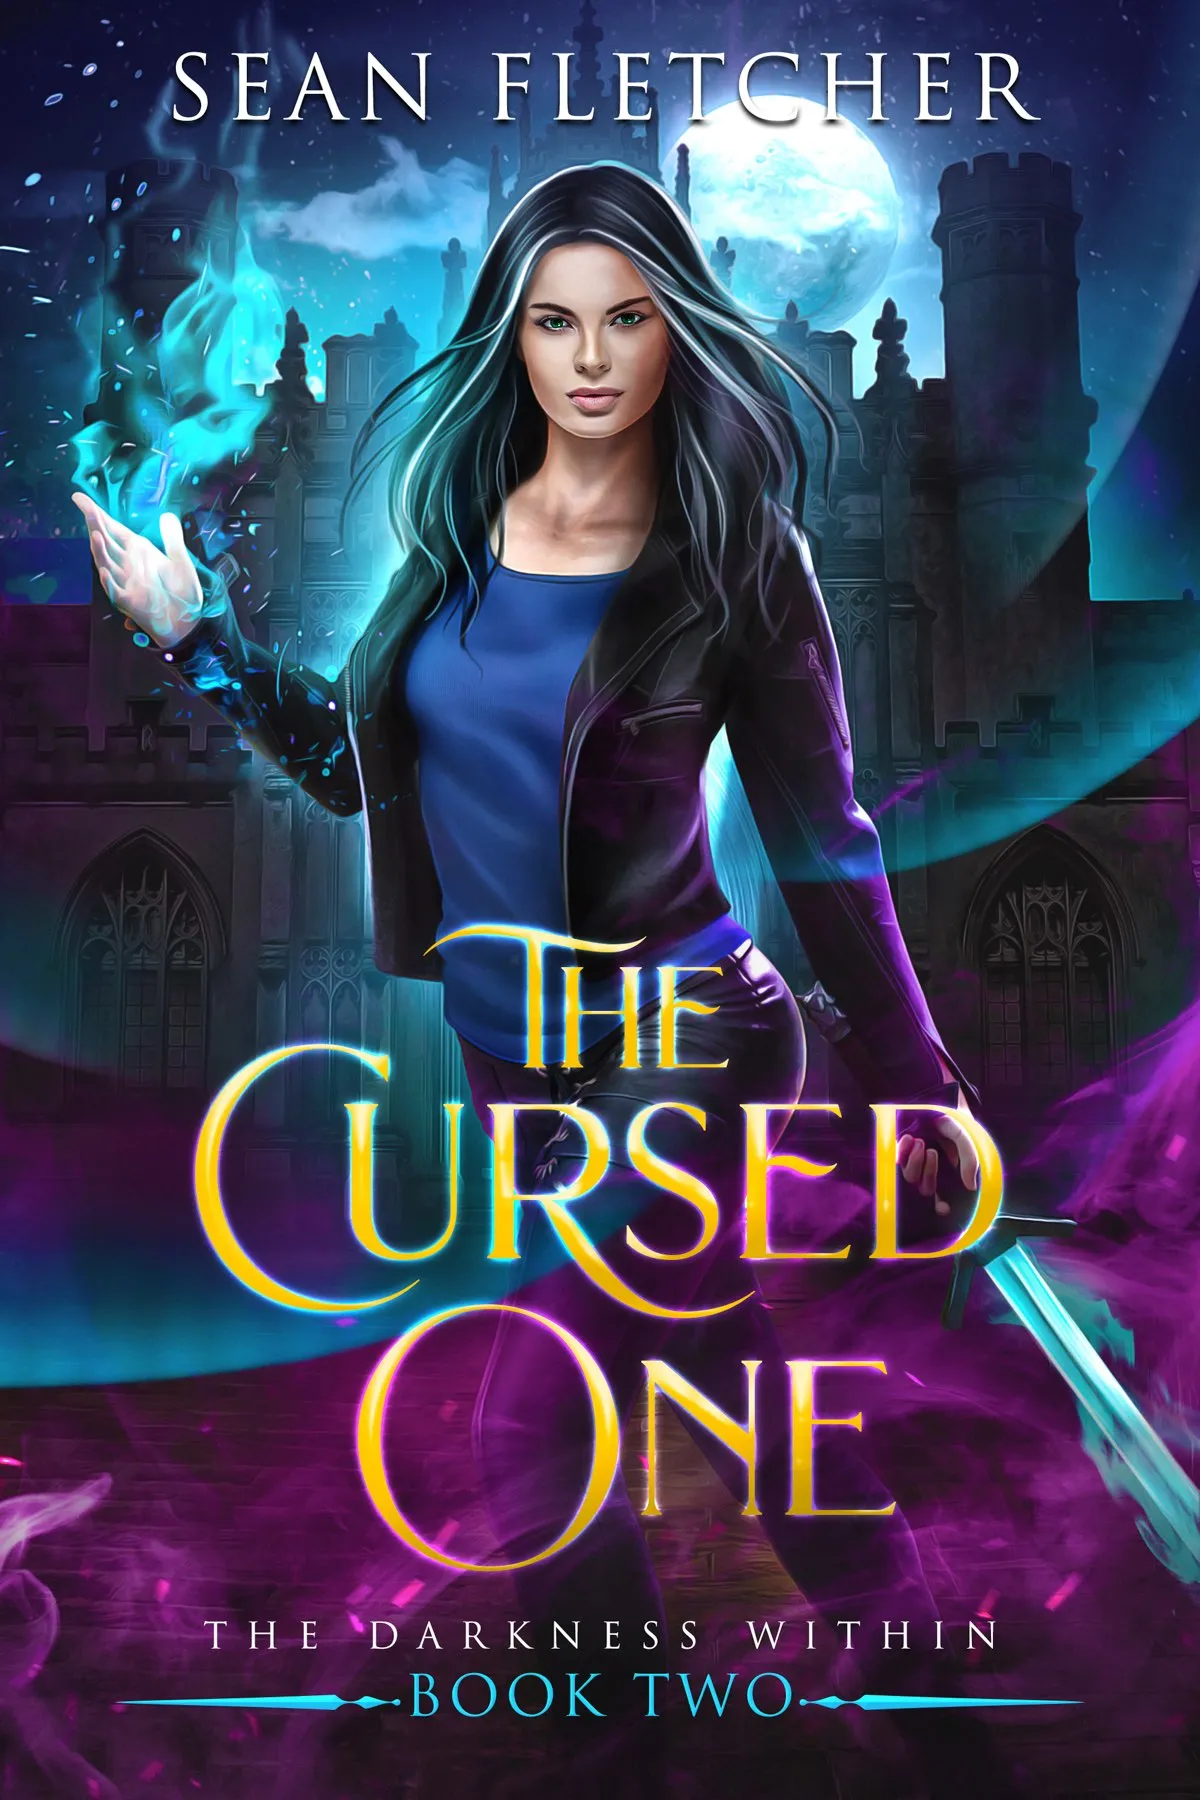 The Cursed One (The Darkness Within #2)